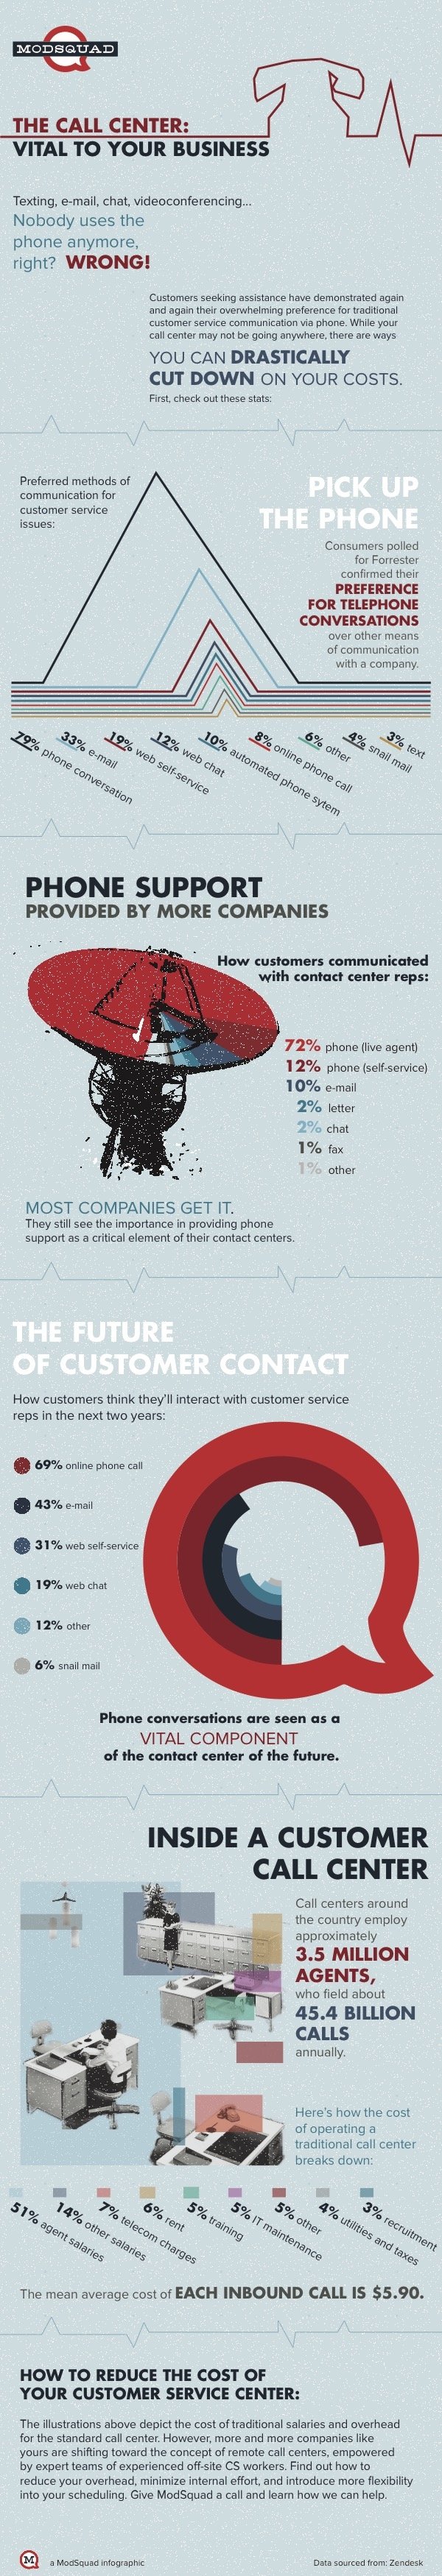 ModSquad Infographic - The Call Center